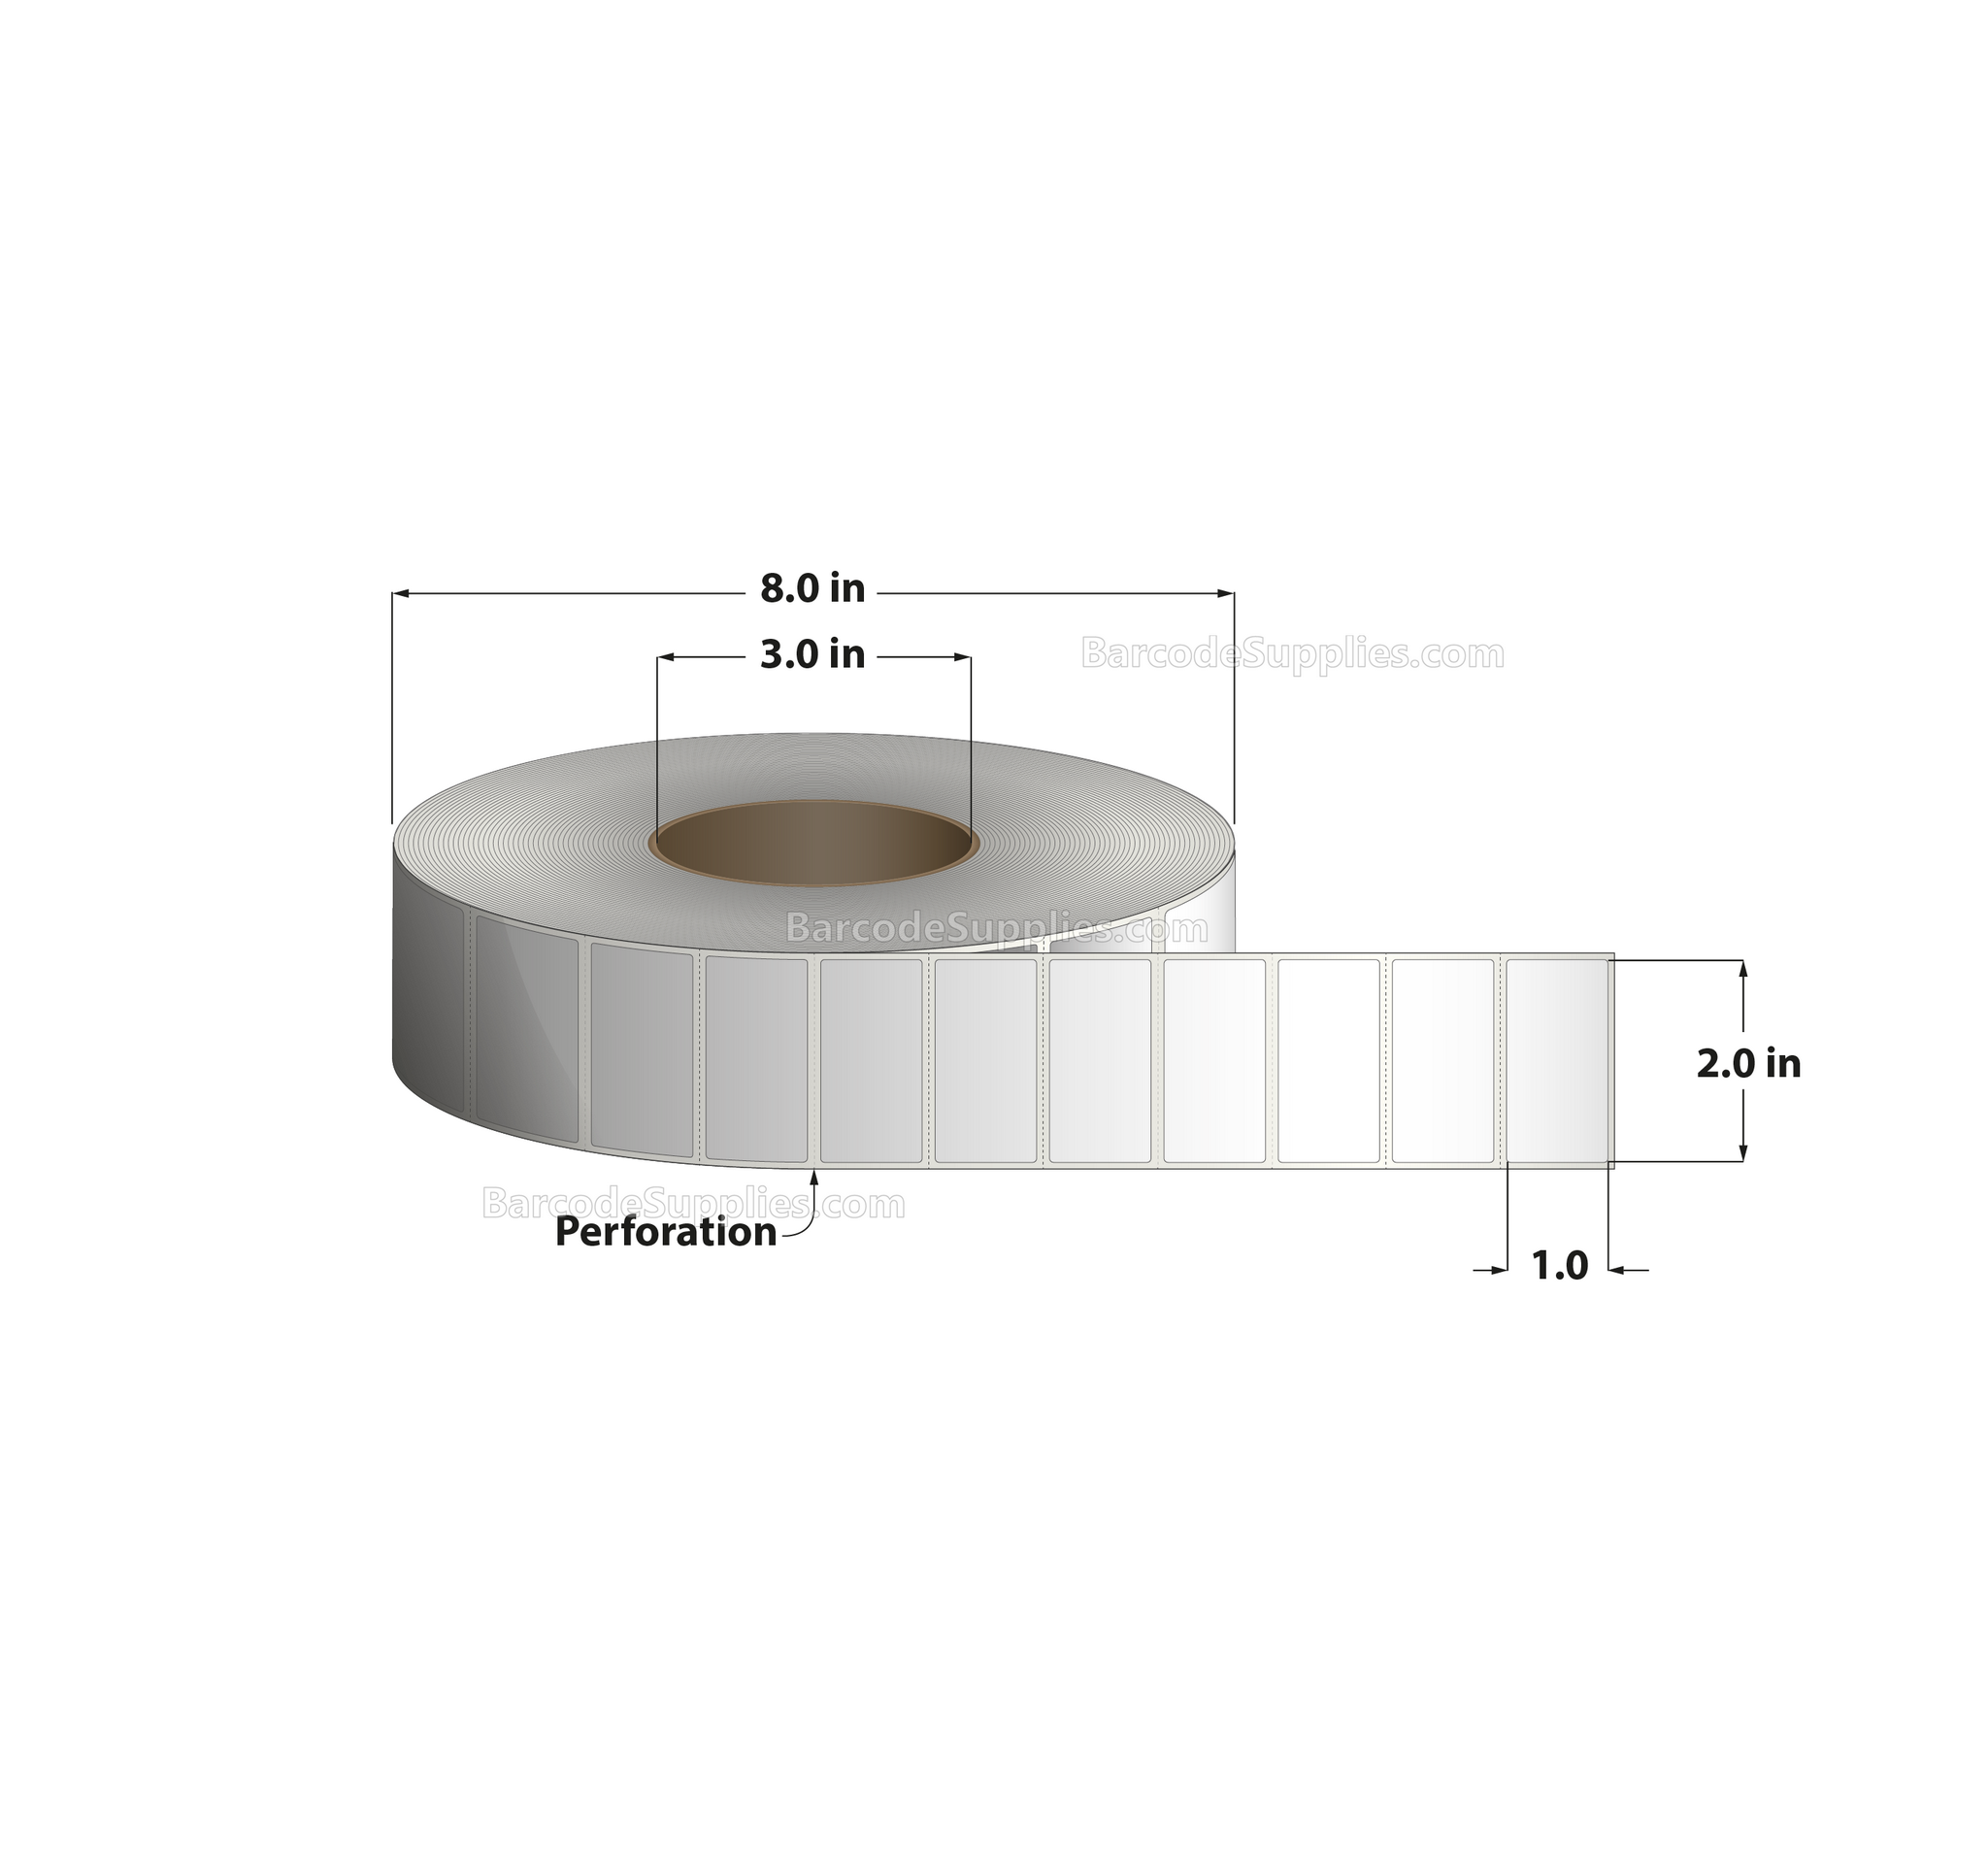 2 x 1 Thermal Transfer White Labels With Removable Adhesive - Perforated - 5500 Labels Per Roll - Carton Of 8 Rolls - 44000 Labels Total - MPN: RE-2-1-5500-3